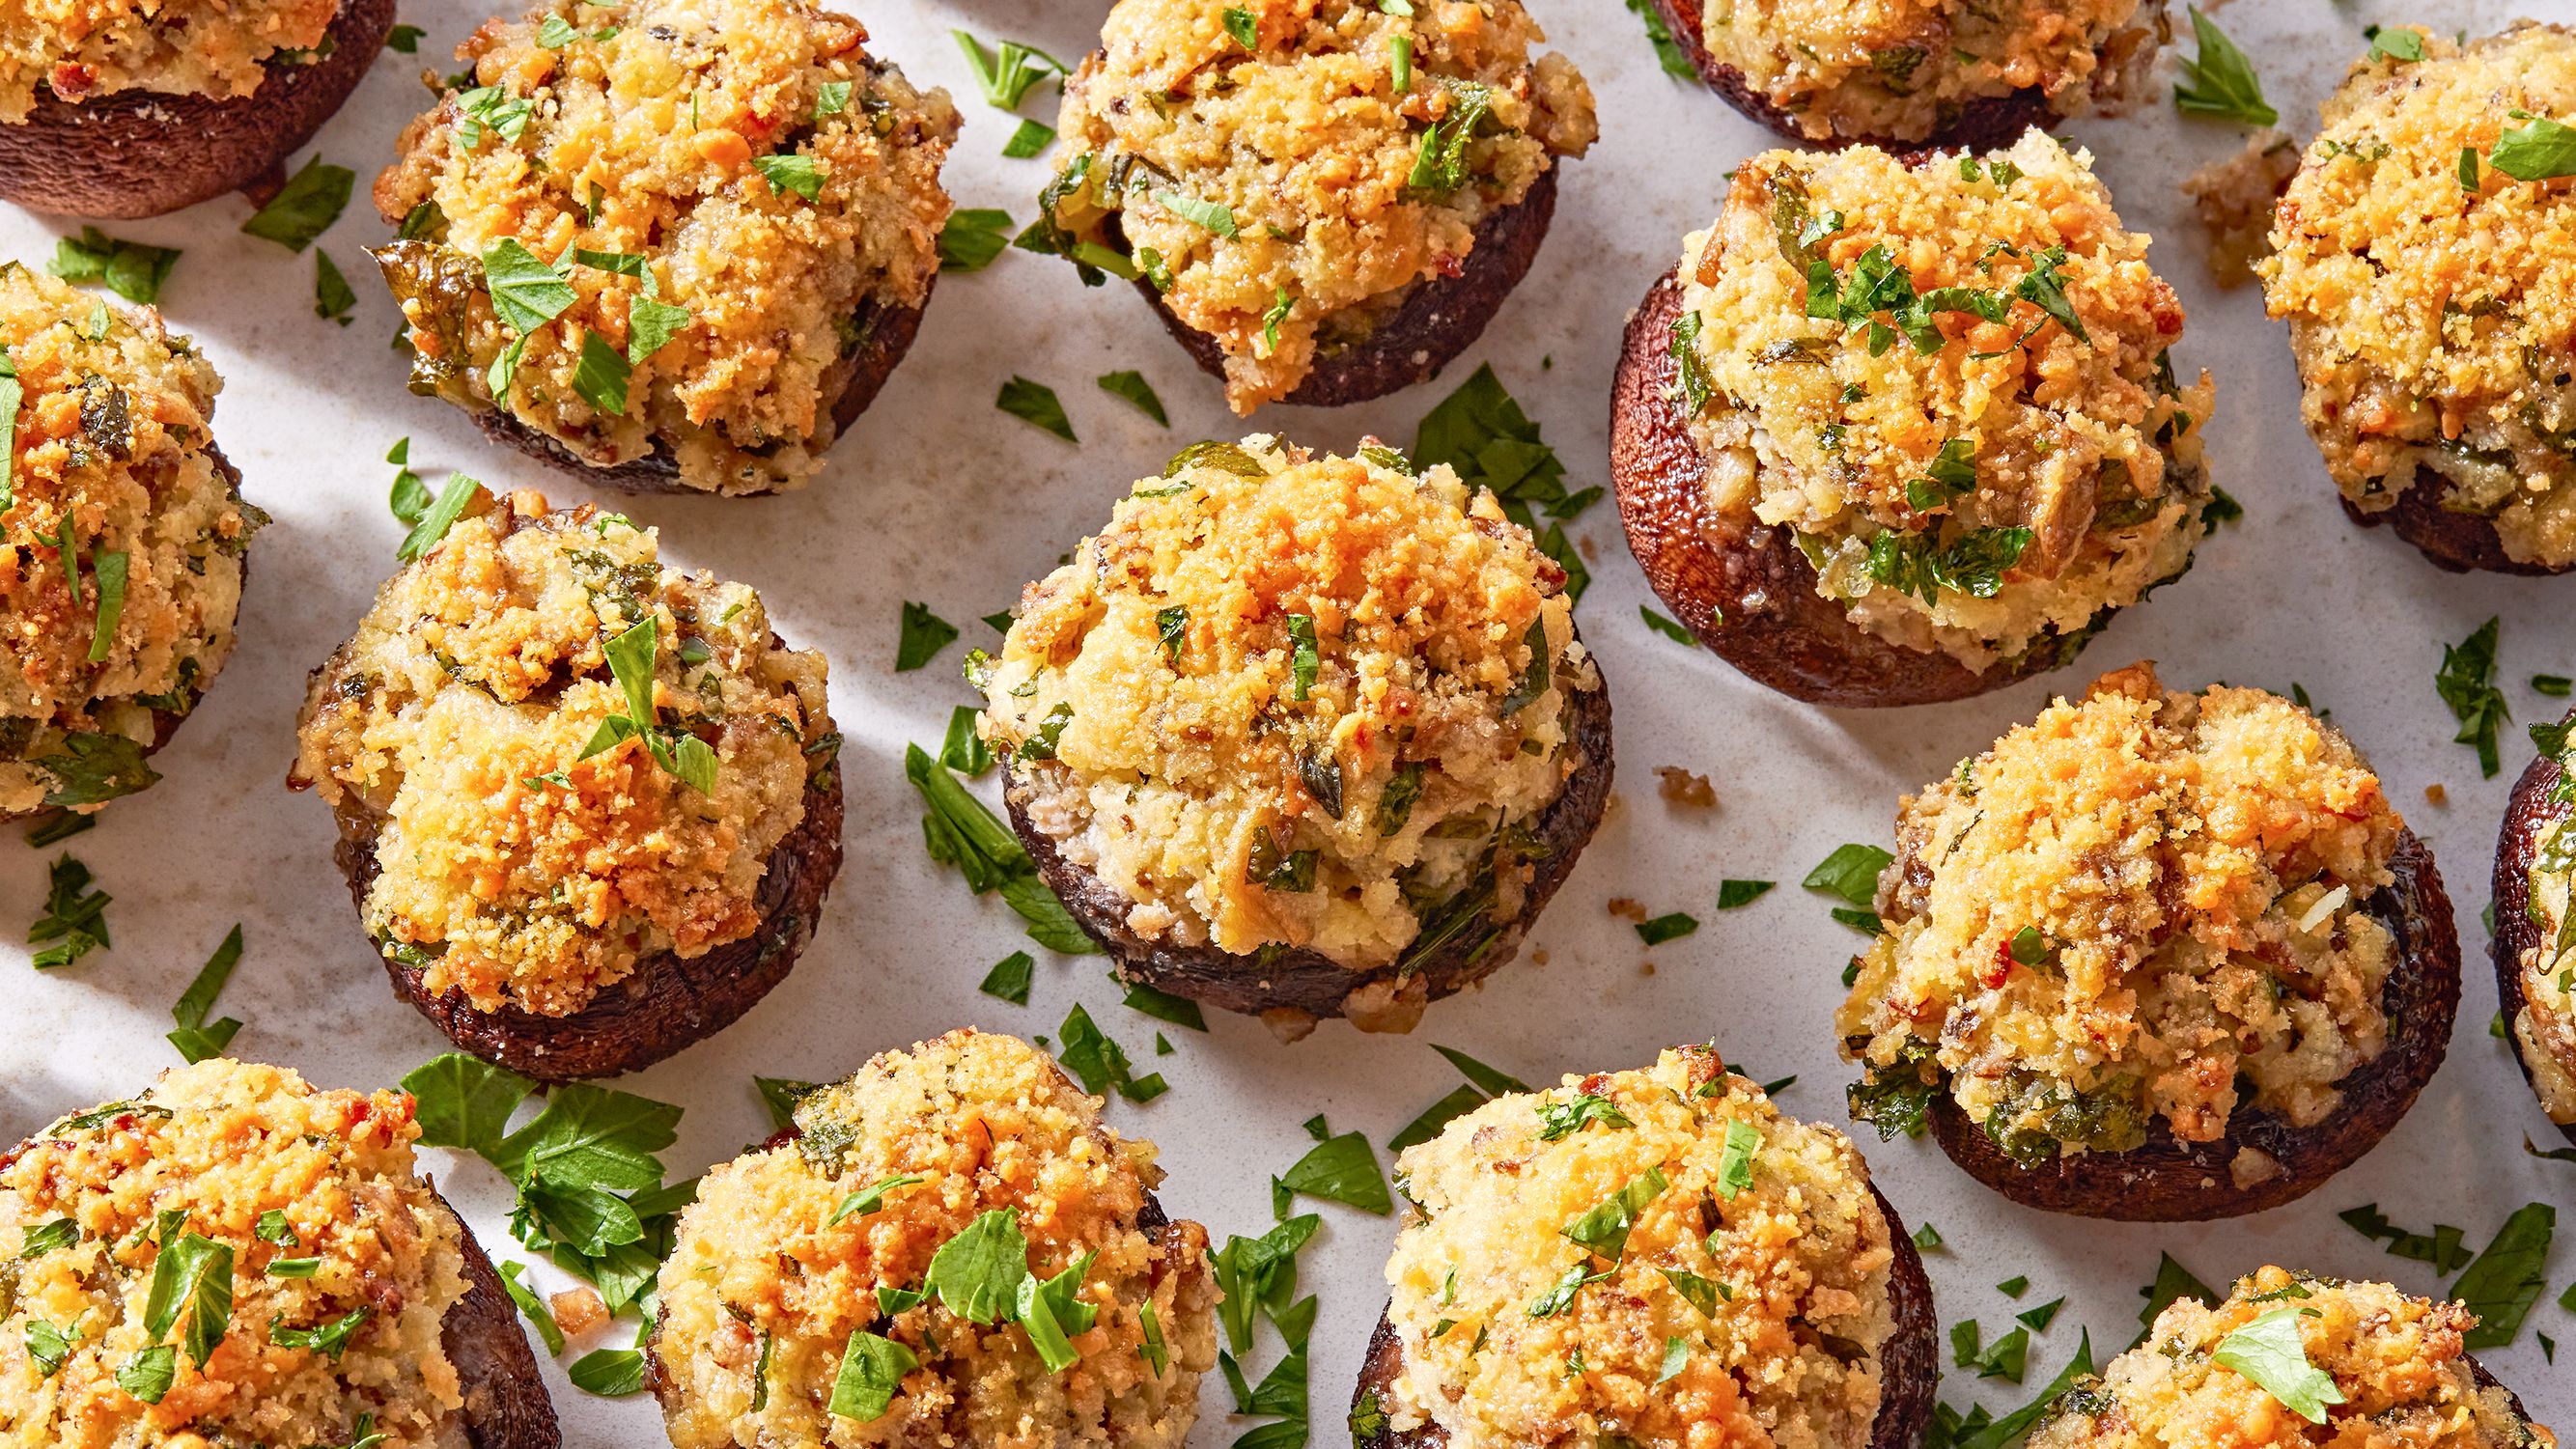 These Stuffed Mushrooms Are A Holiday Party Must